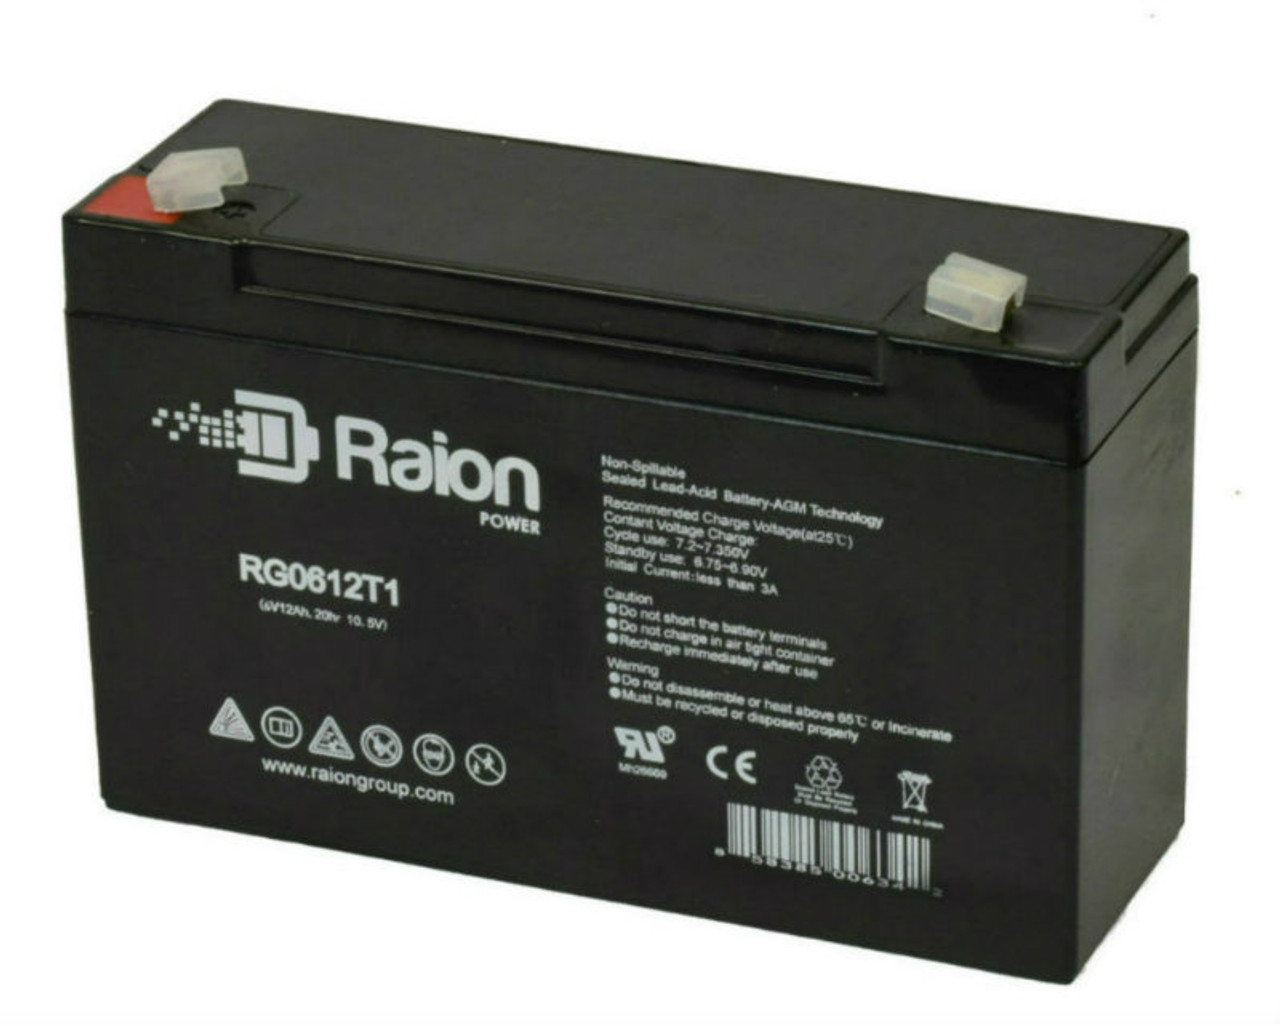 Raion Power RG06120T1 Replacement Emergency Light Battery for ELS ELS C